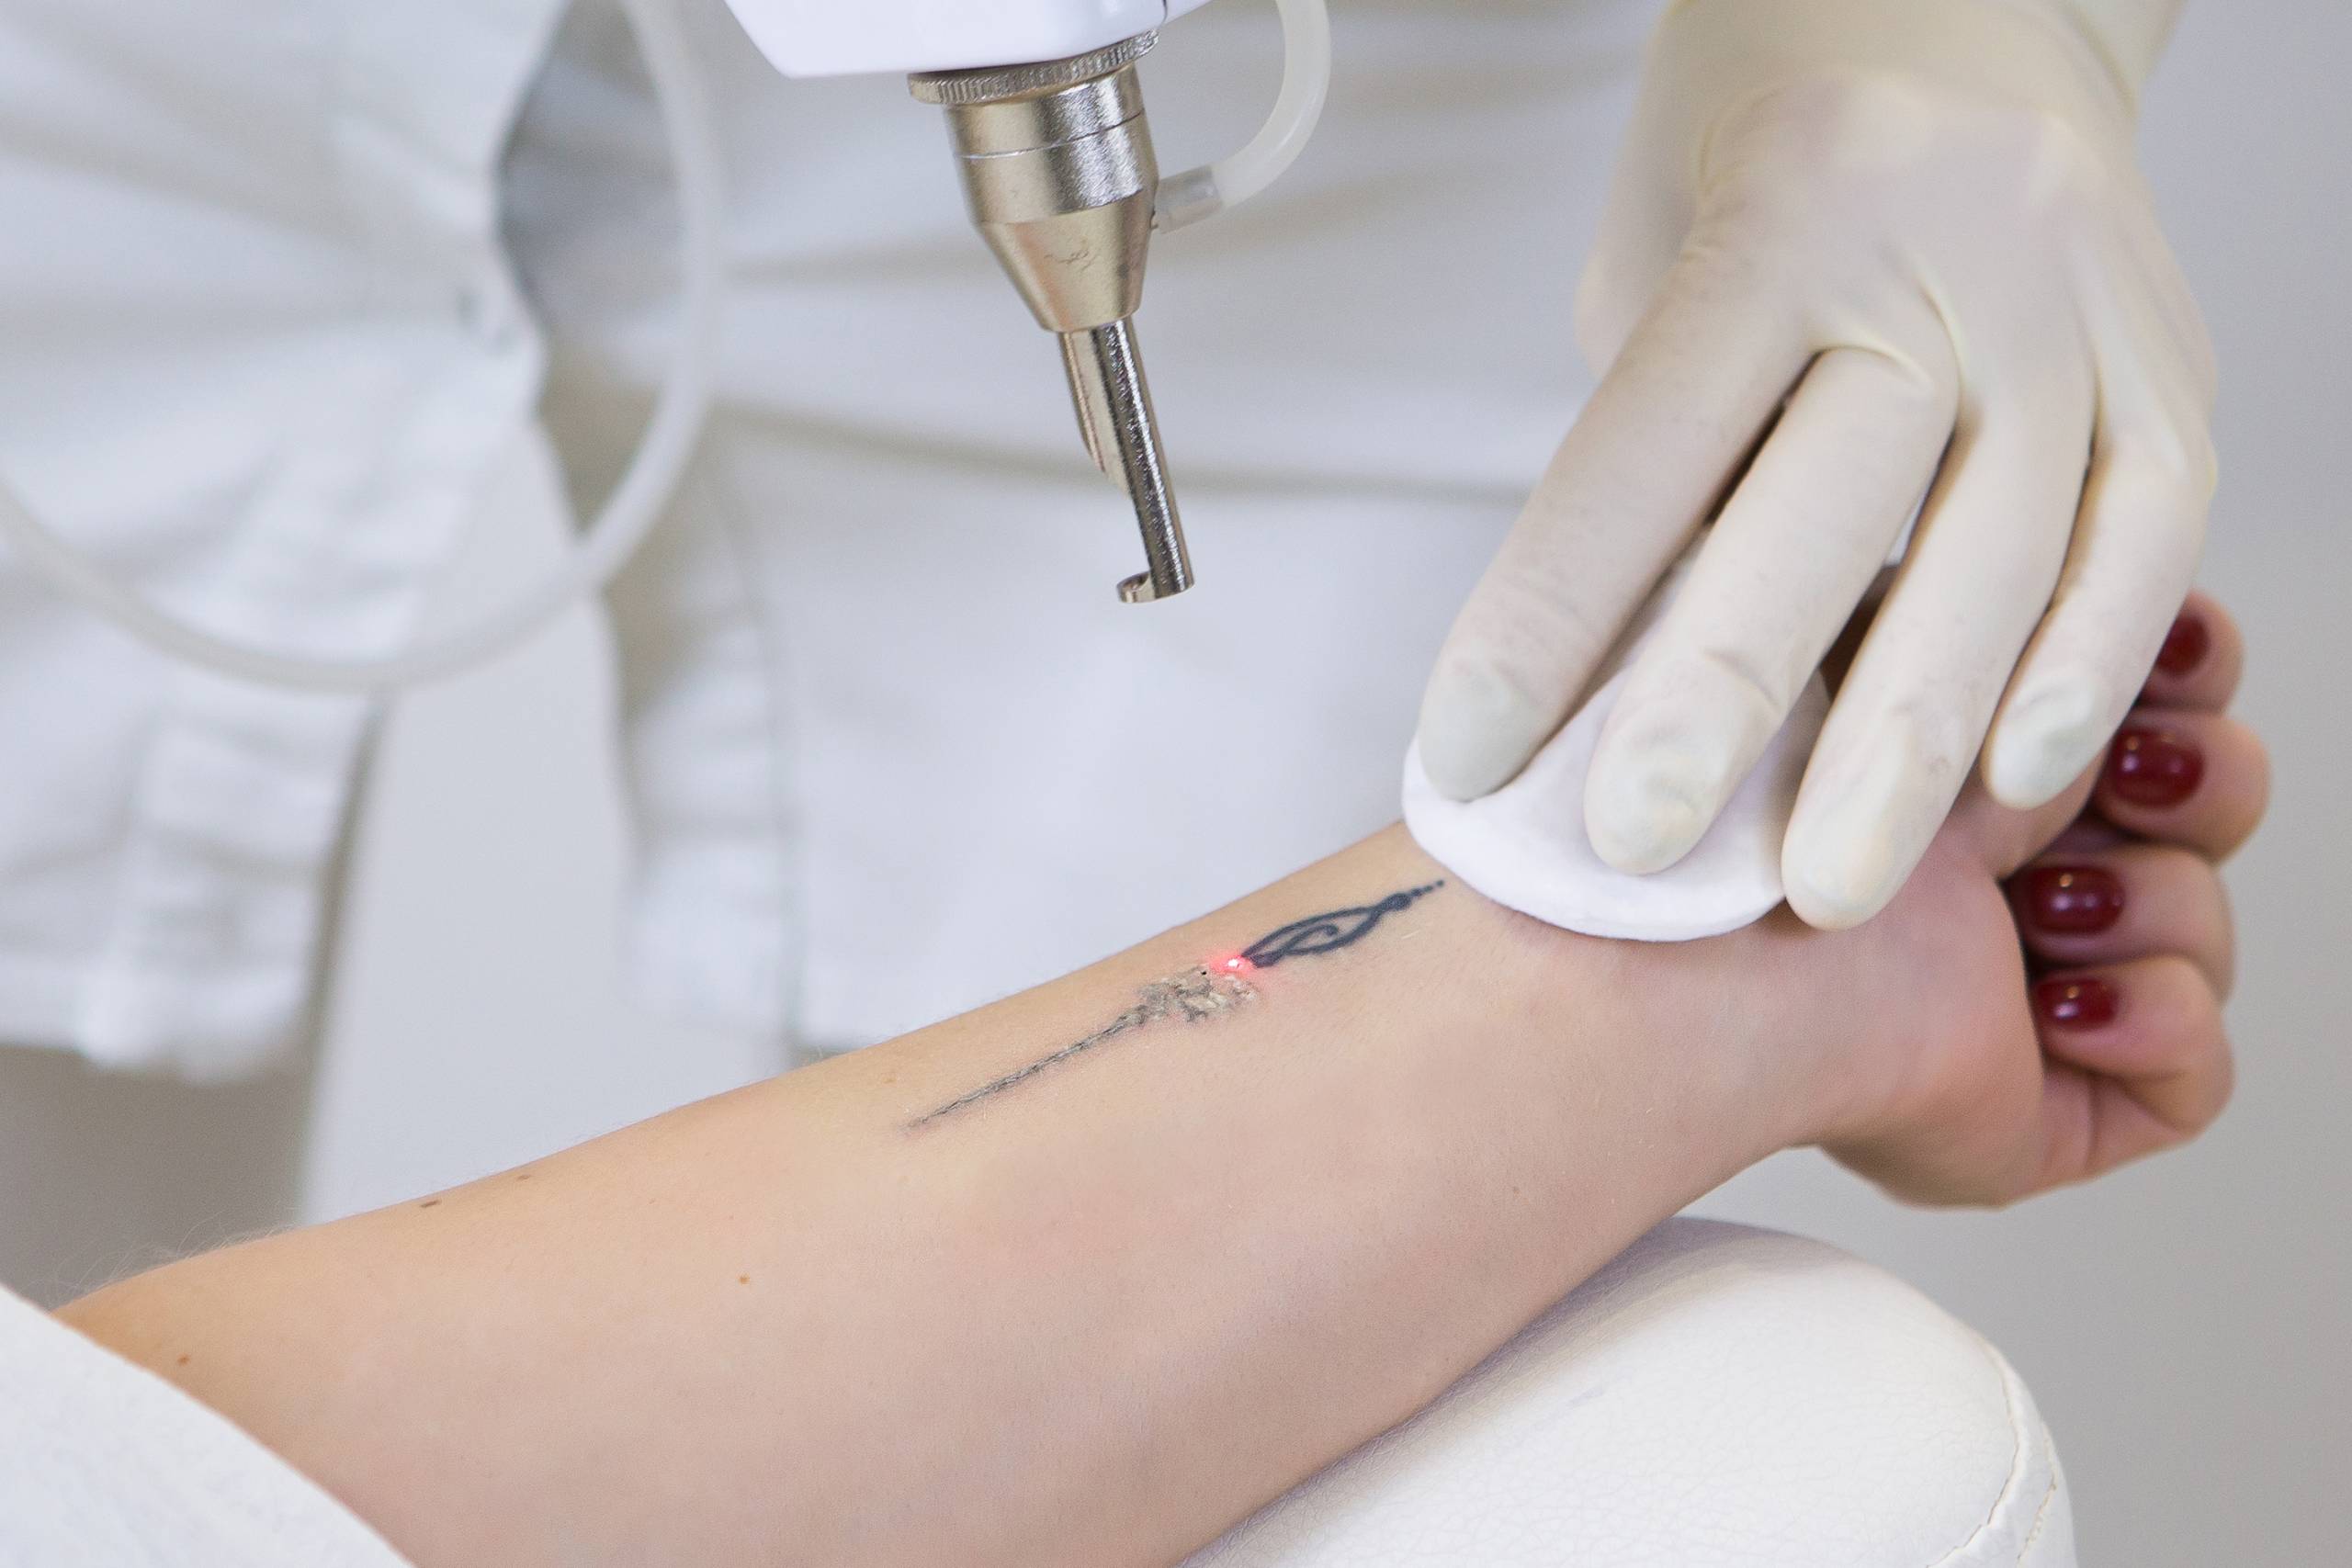 Tattoo Removal - Lutronic United States